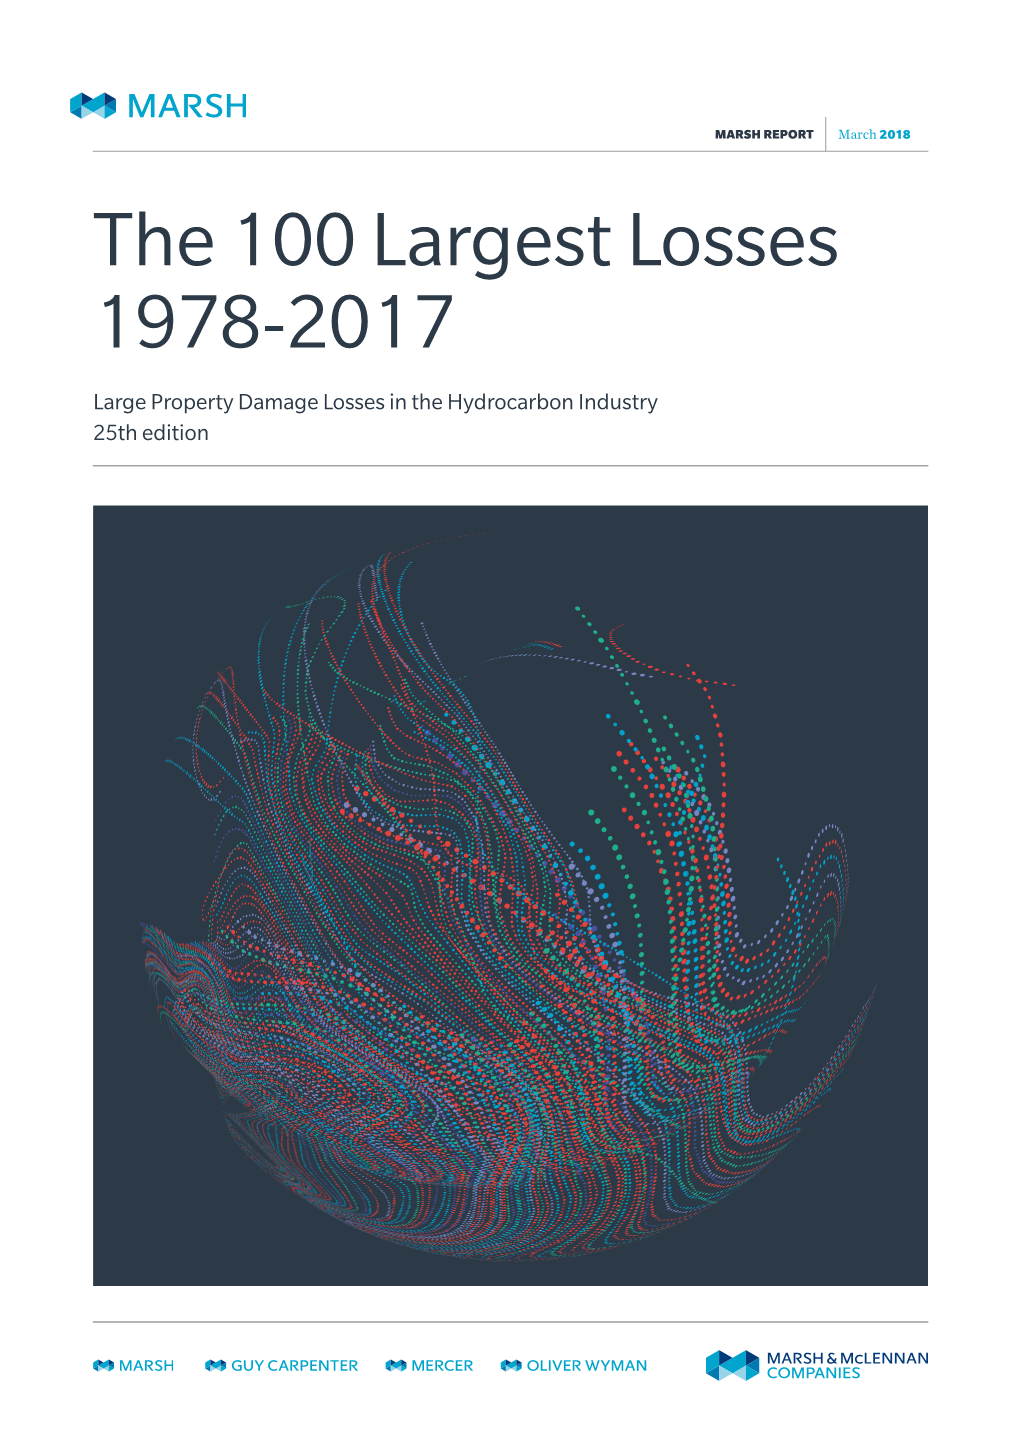 The 100 Largest Losses 1978-2017